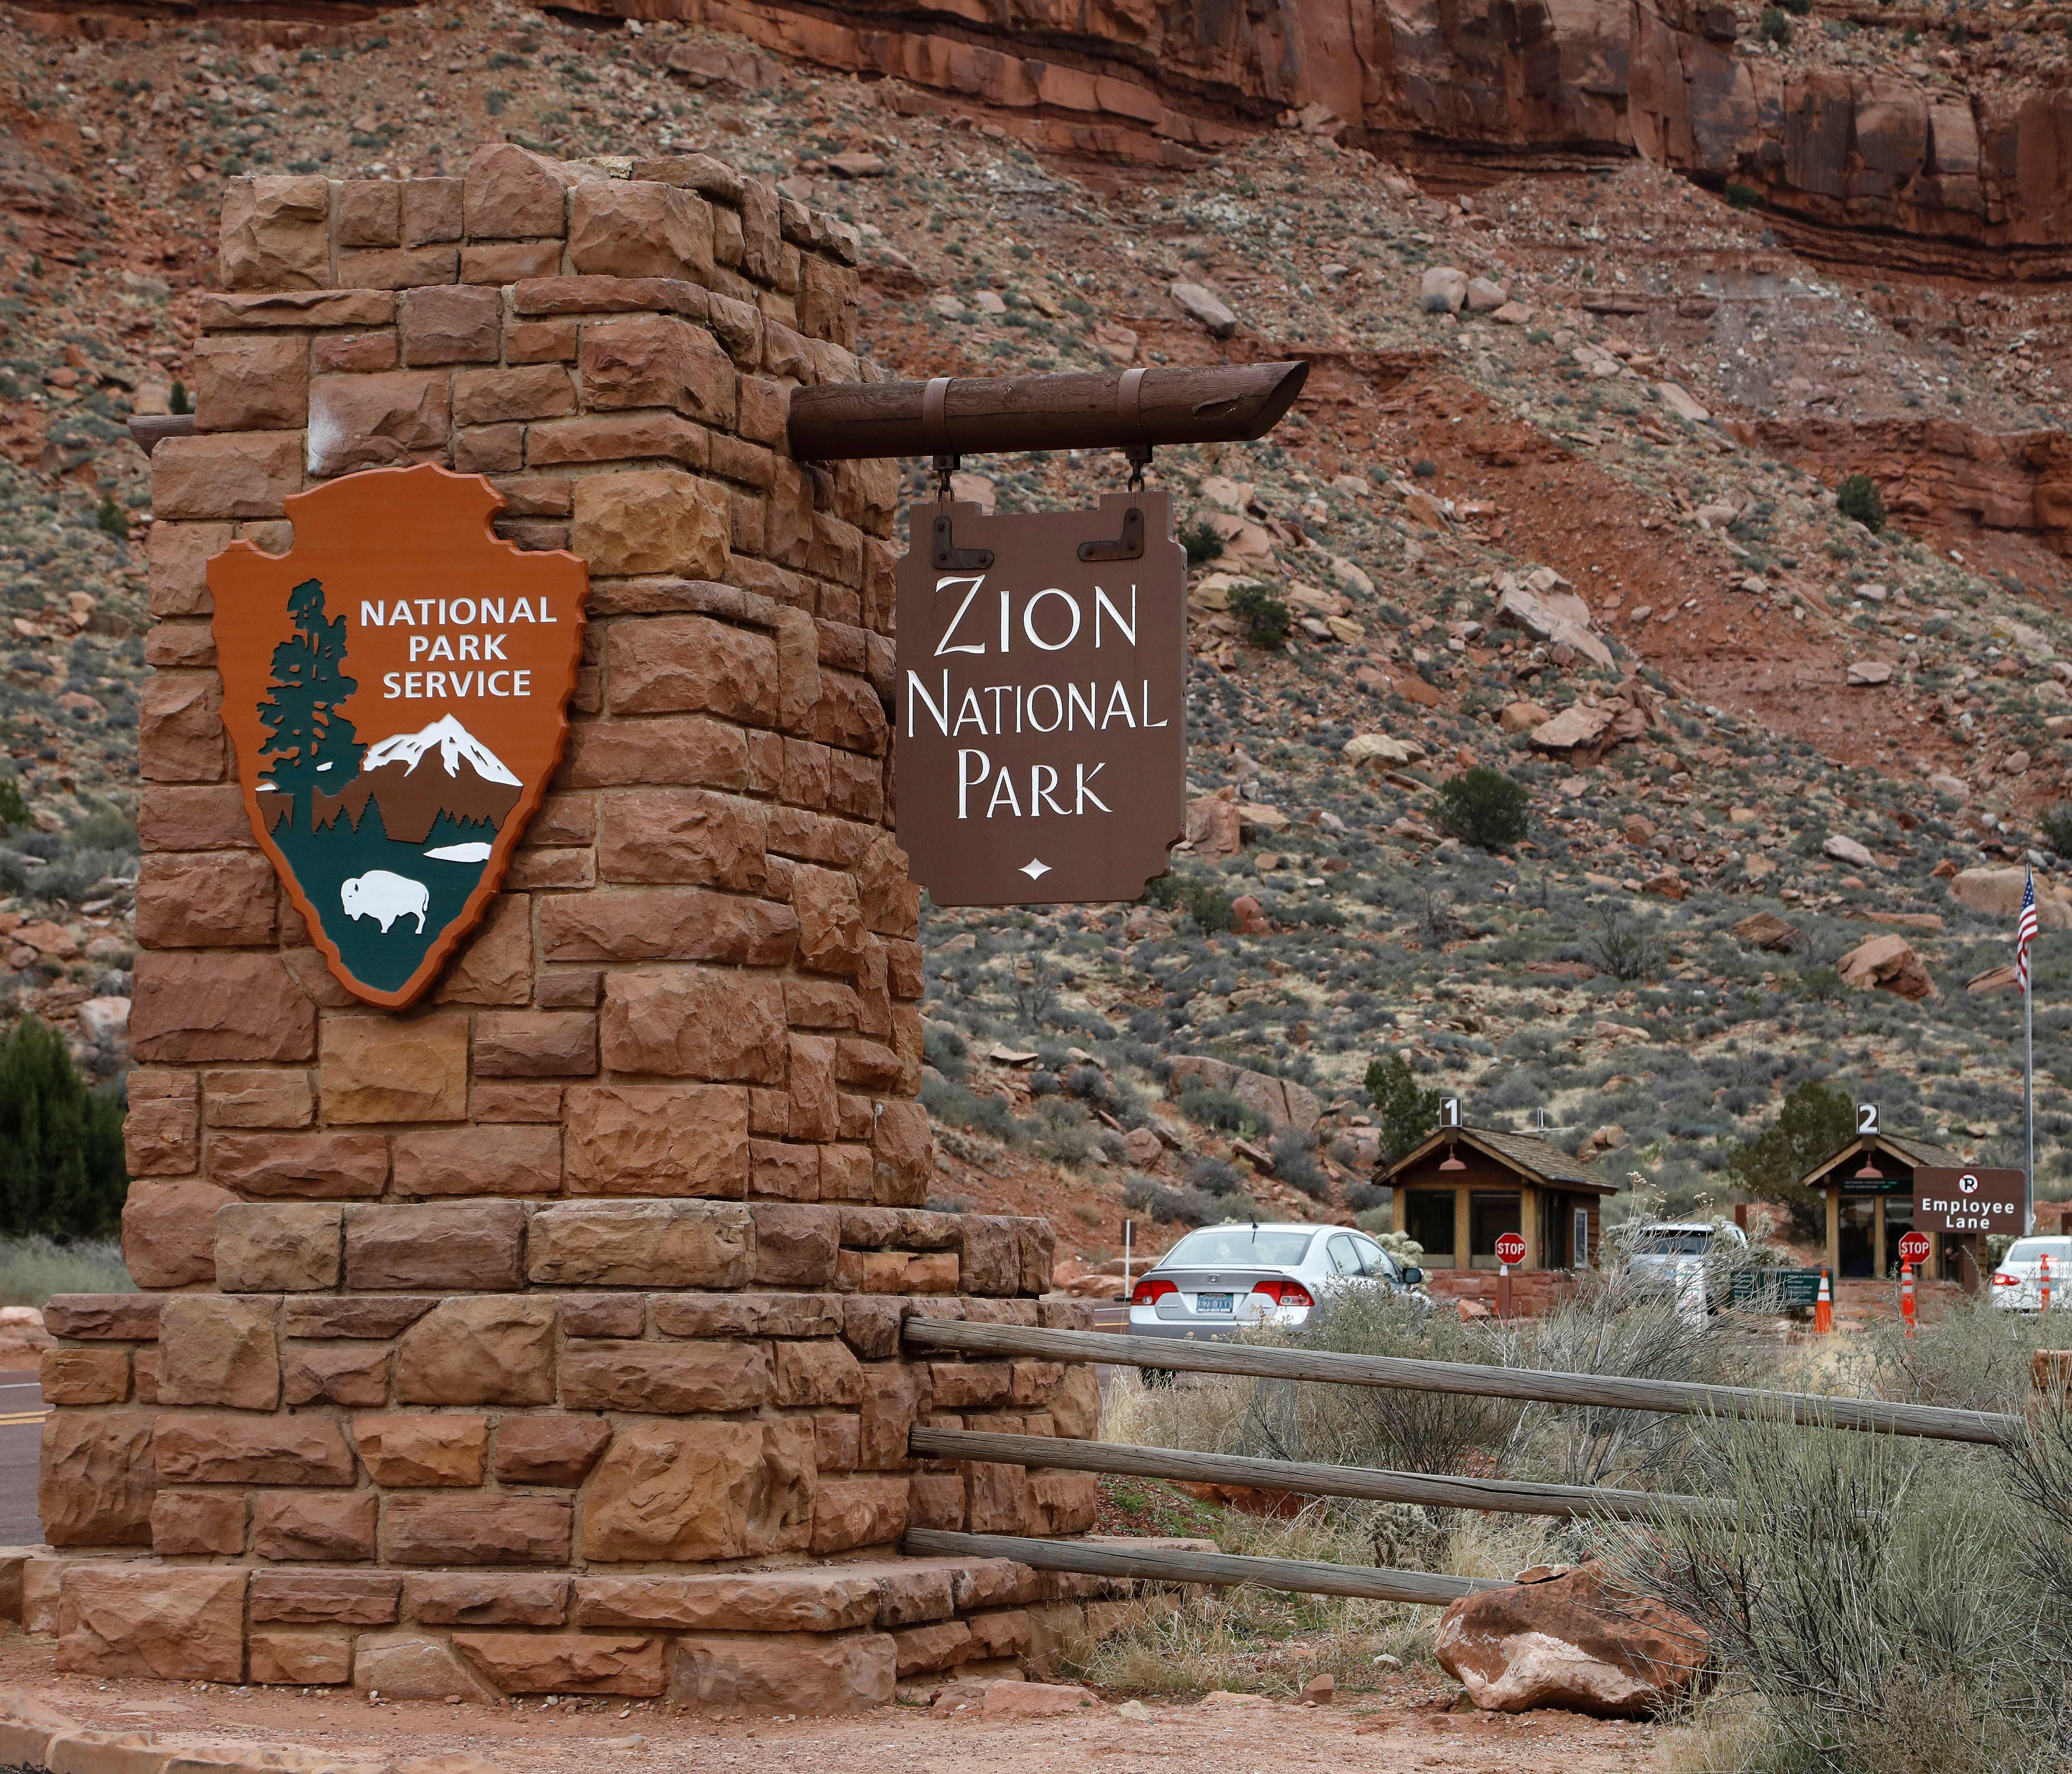 Cars drive through an entrance of Zion National Park, Utah, on February 9, 2017. / AFP PHOTO / RHONA WISE (Photo credit should read RHONA WISE/AFP/Getty Images) ORG XMIT: MIA132 [Via MerlinFTP Drop]